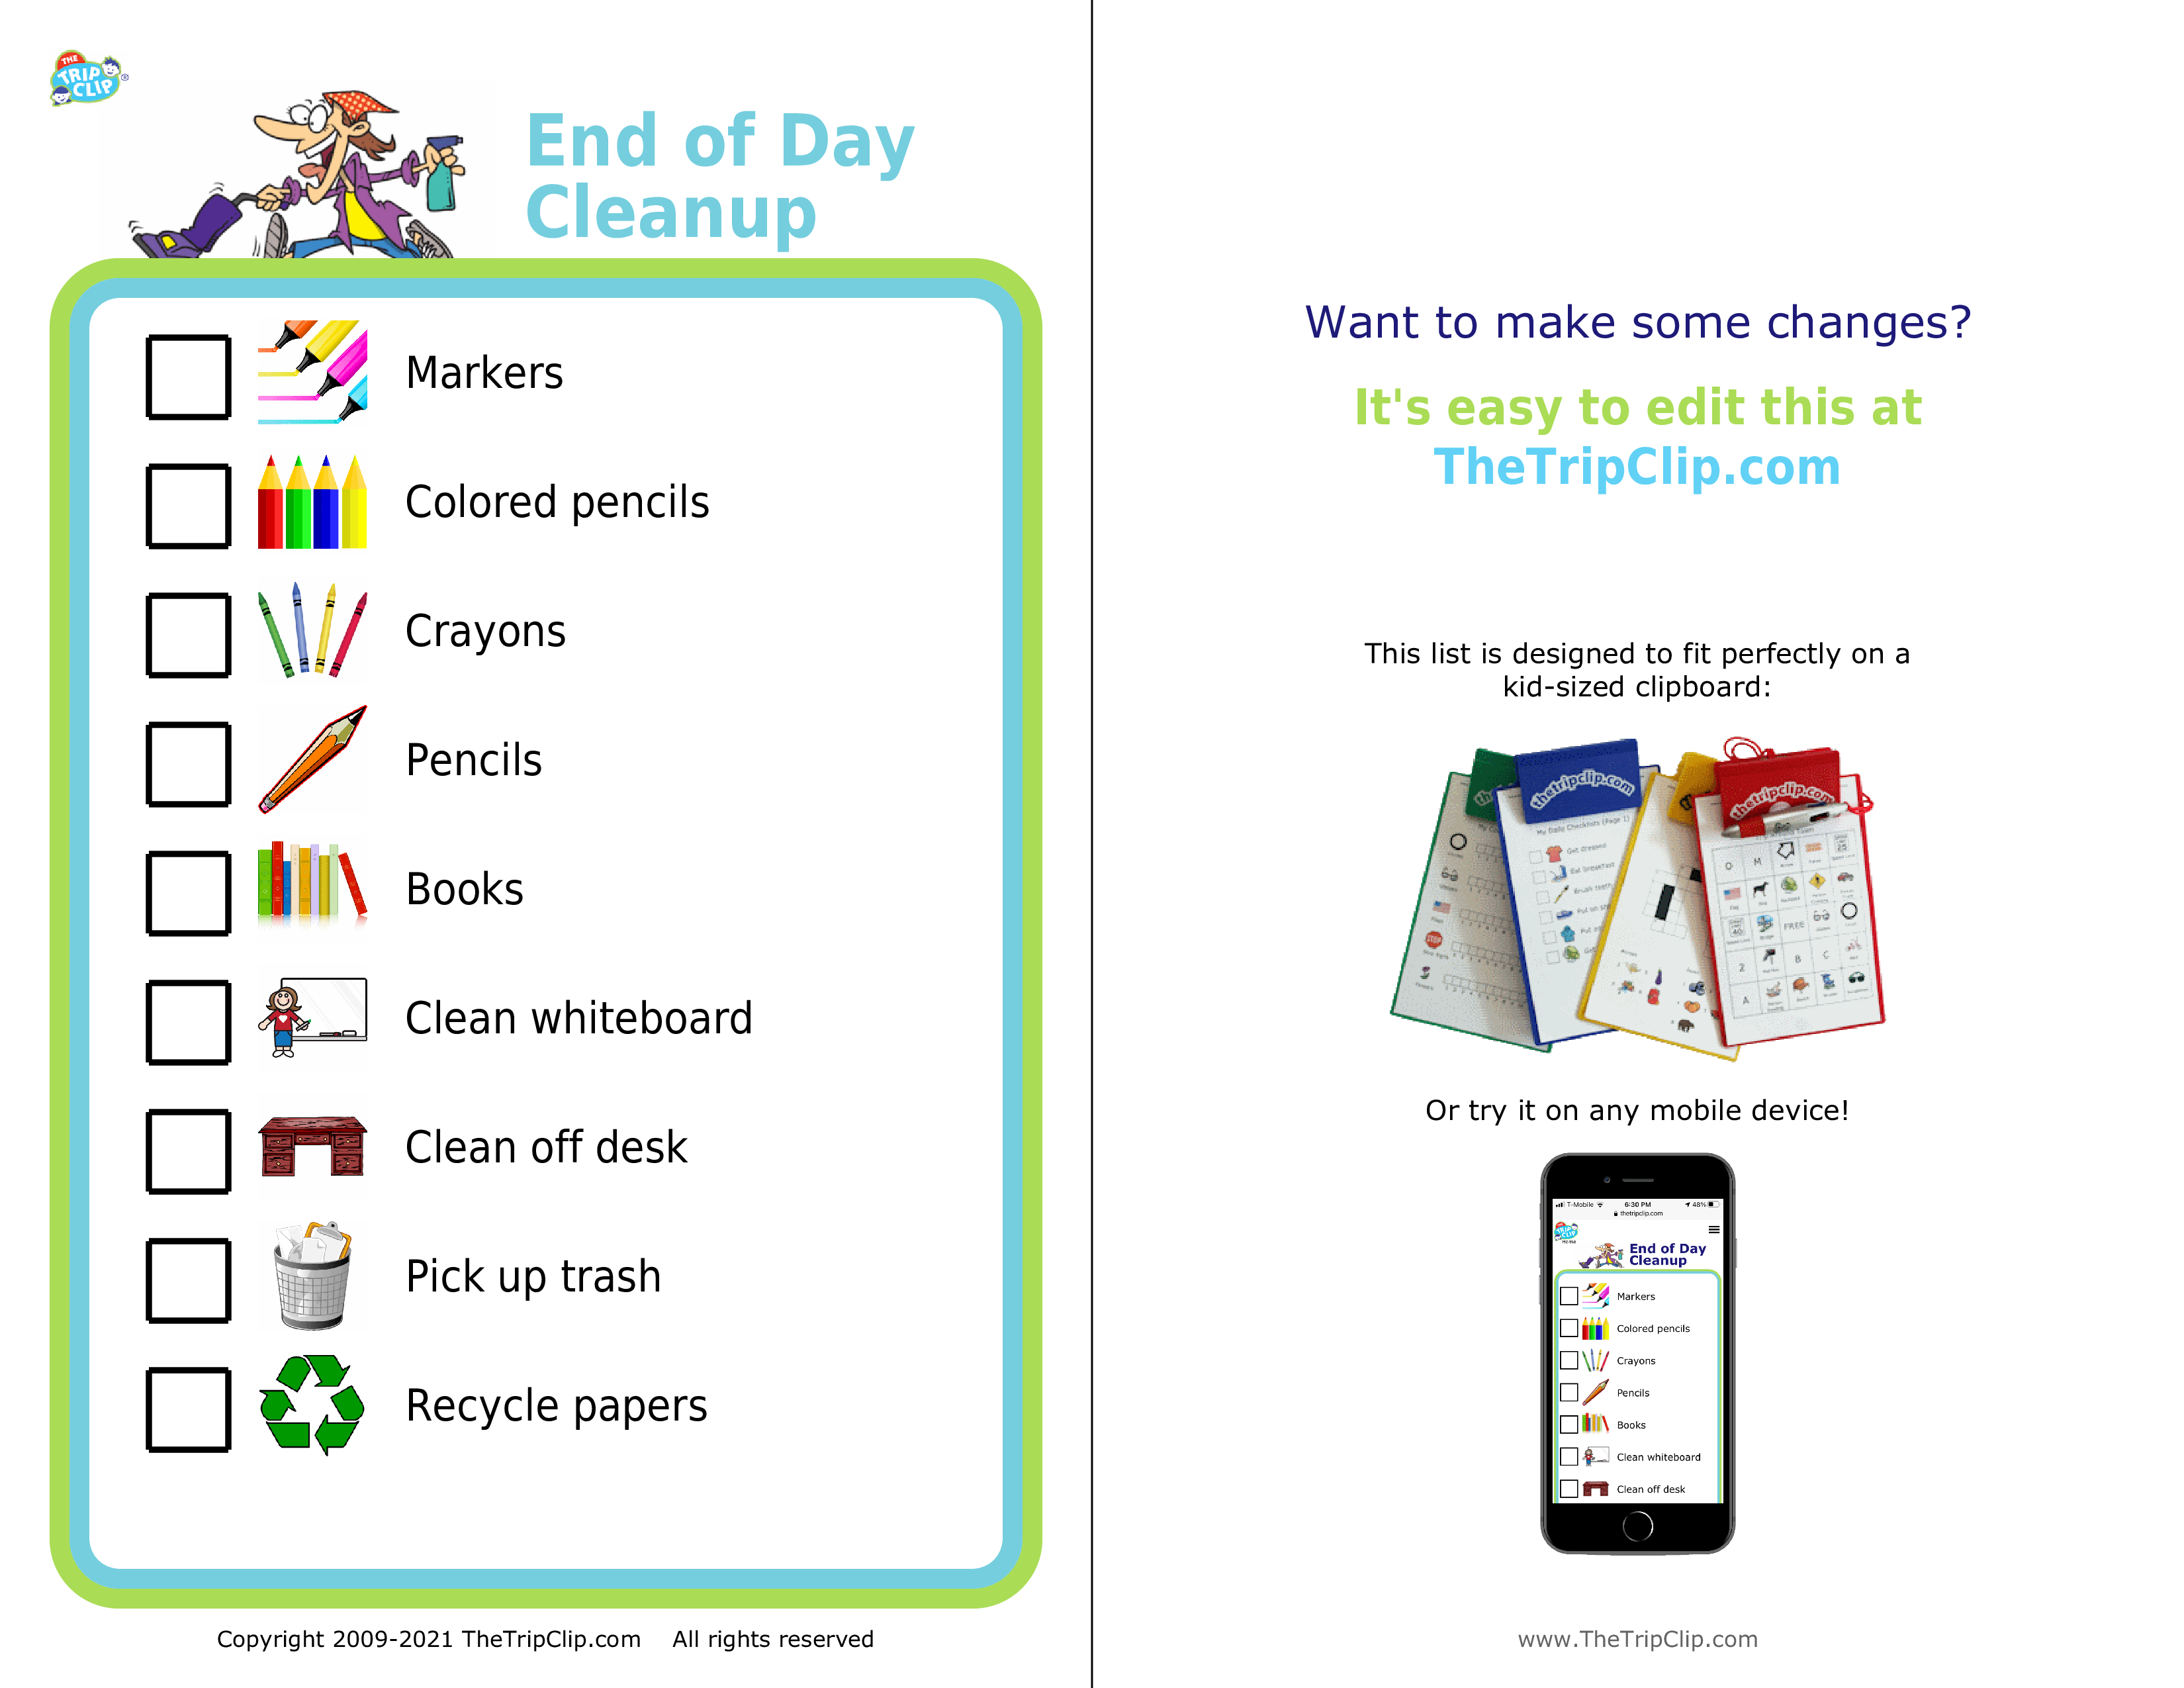 Picture checklist showing classroom items to clean up at the end of school